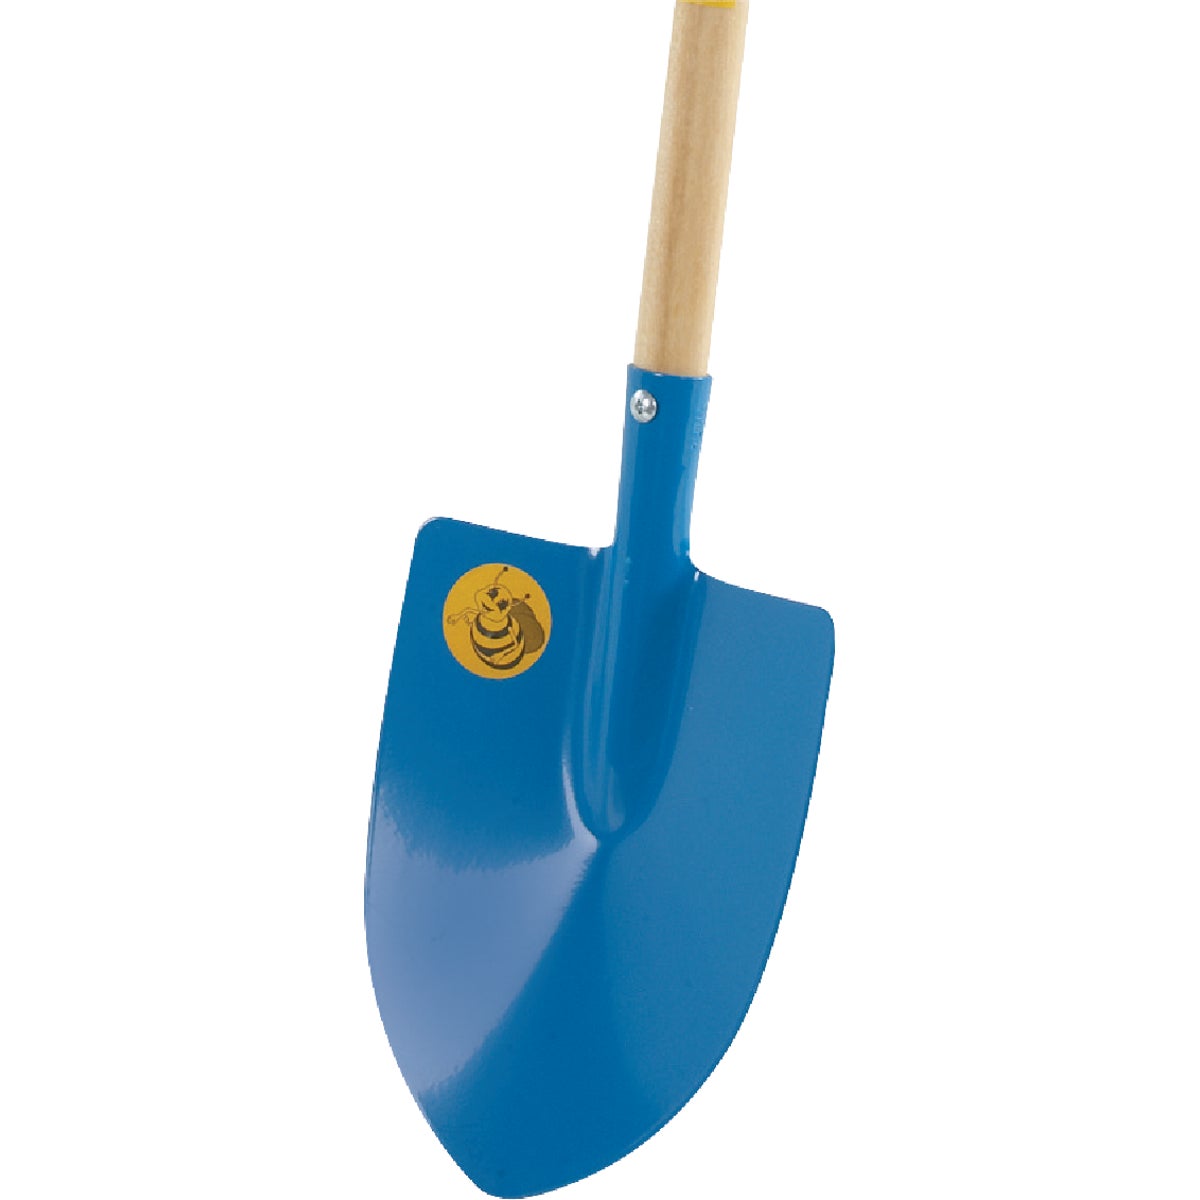 Item 706702, High-quality childrens spade is a scaled down replica of full sized adult 